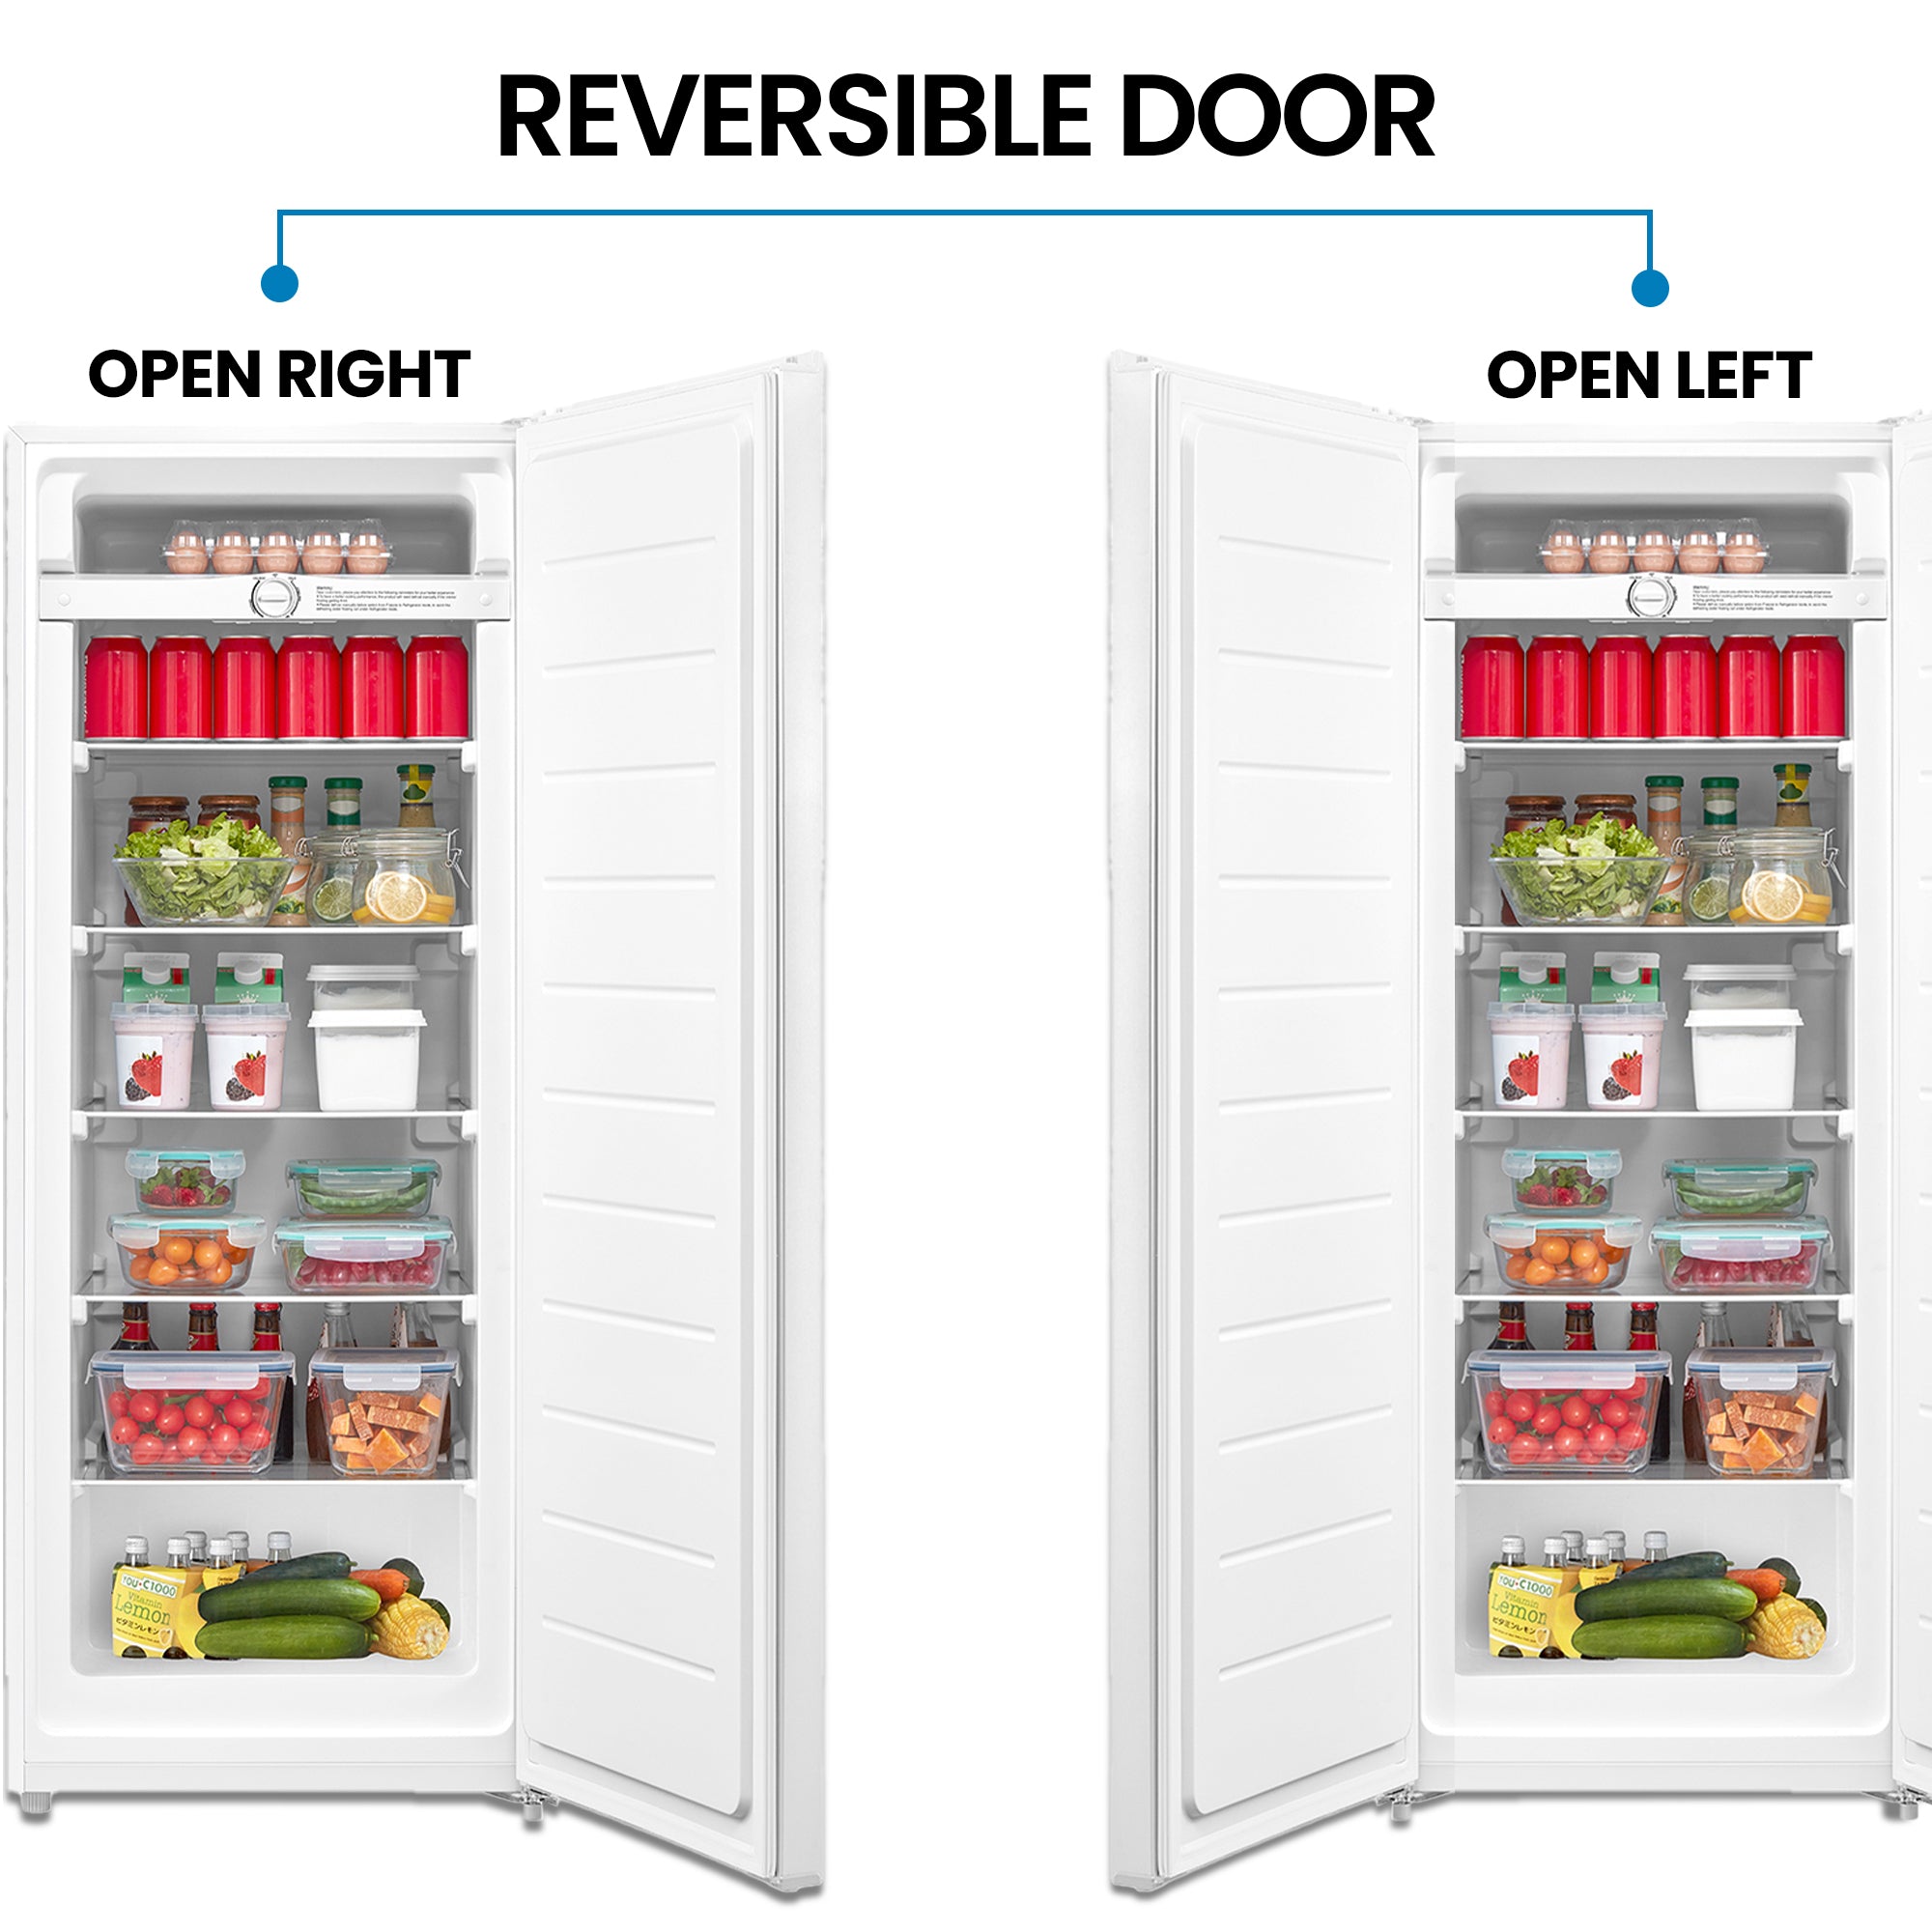 Two pictures show the Kenmore upright convertible open and filled with food items with the reversible installed to open right and left